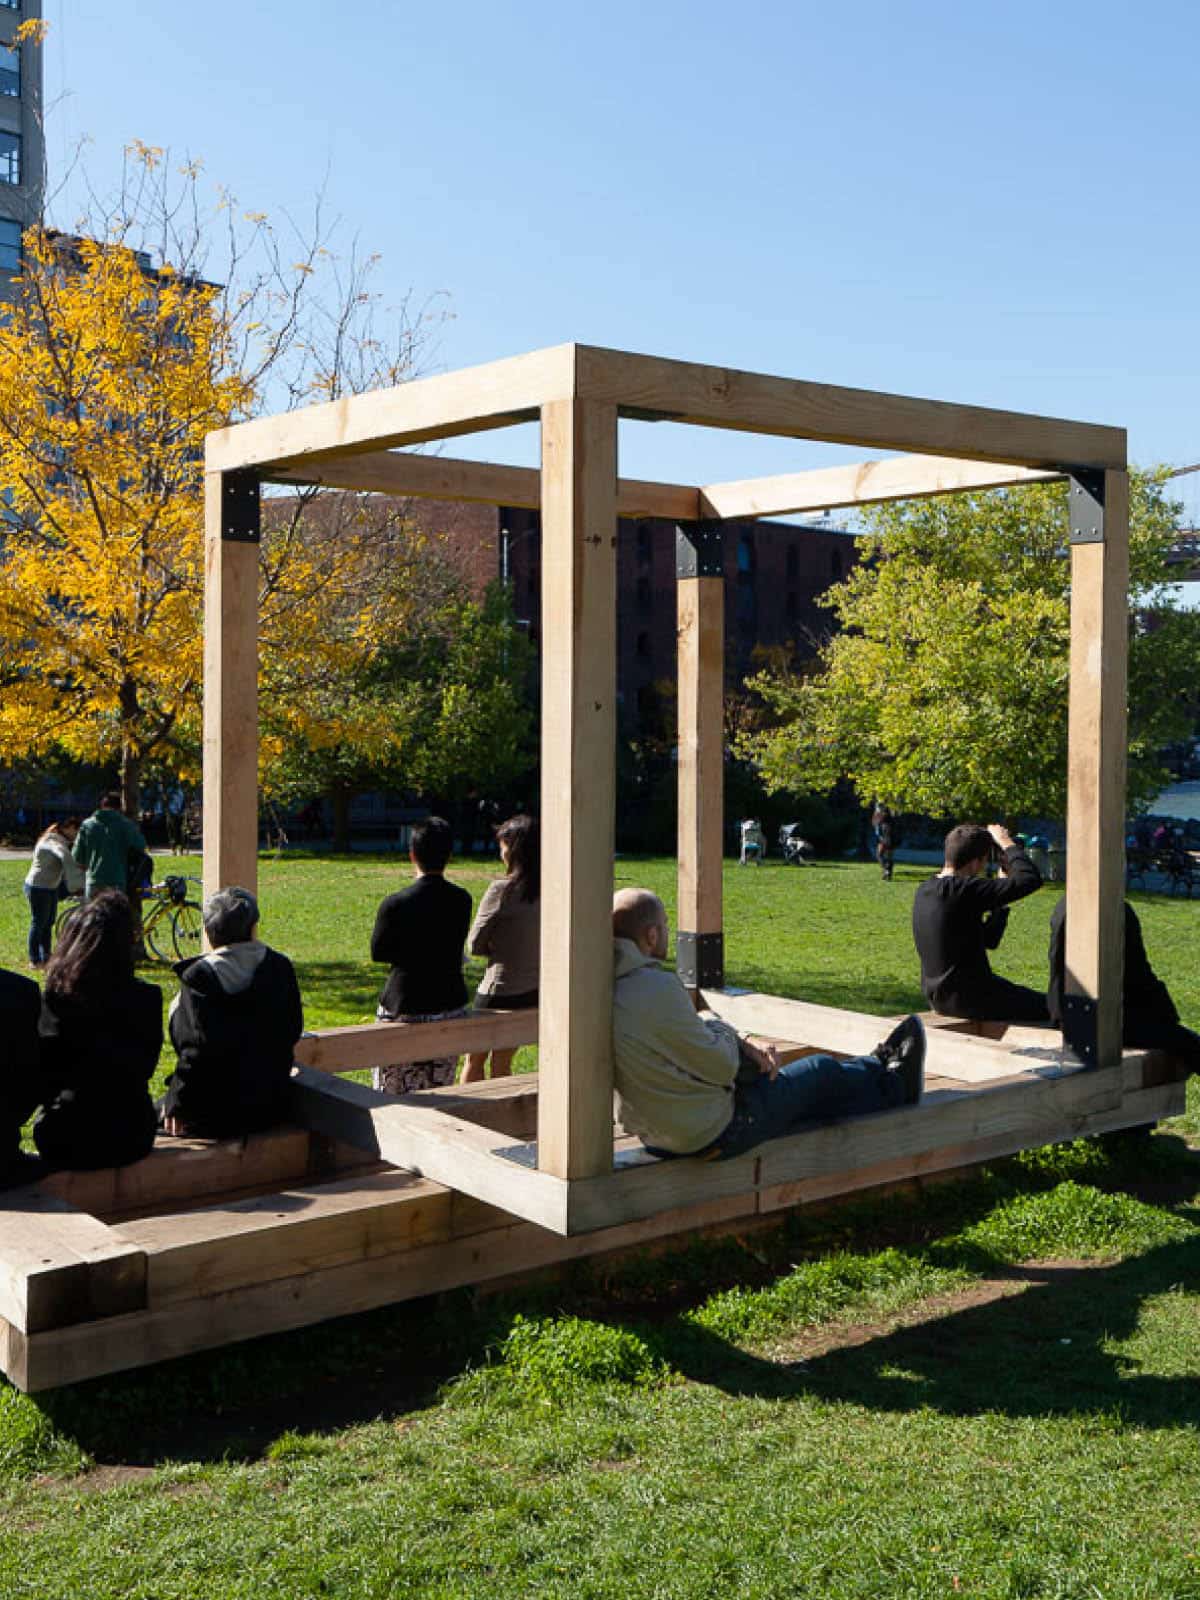 People sitting on Untitled Benches, Tables (Cube for Children) by Michael Clyde Johnson on a sunny day.